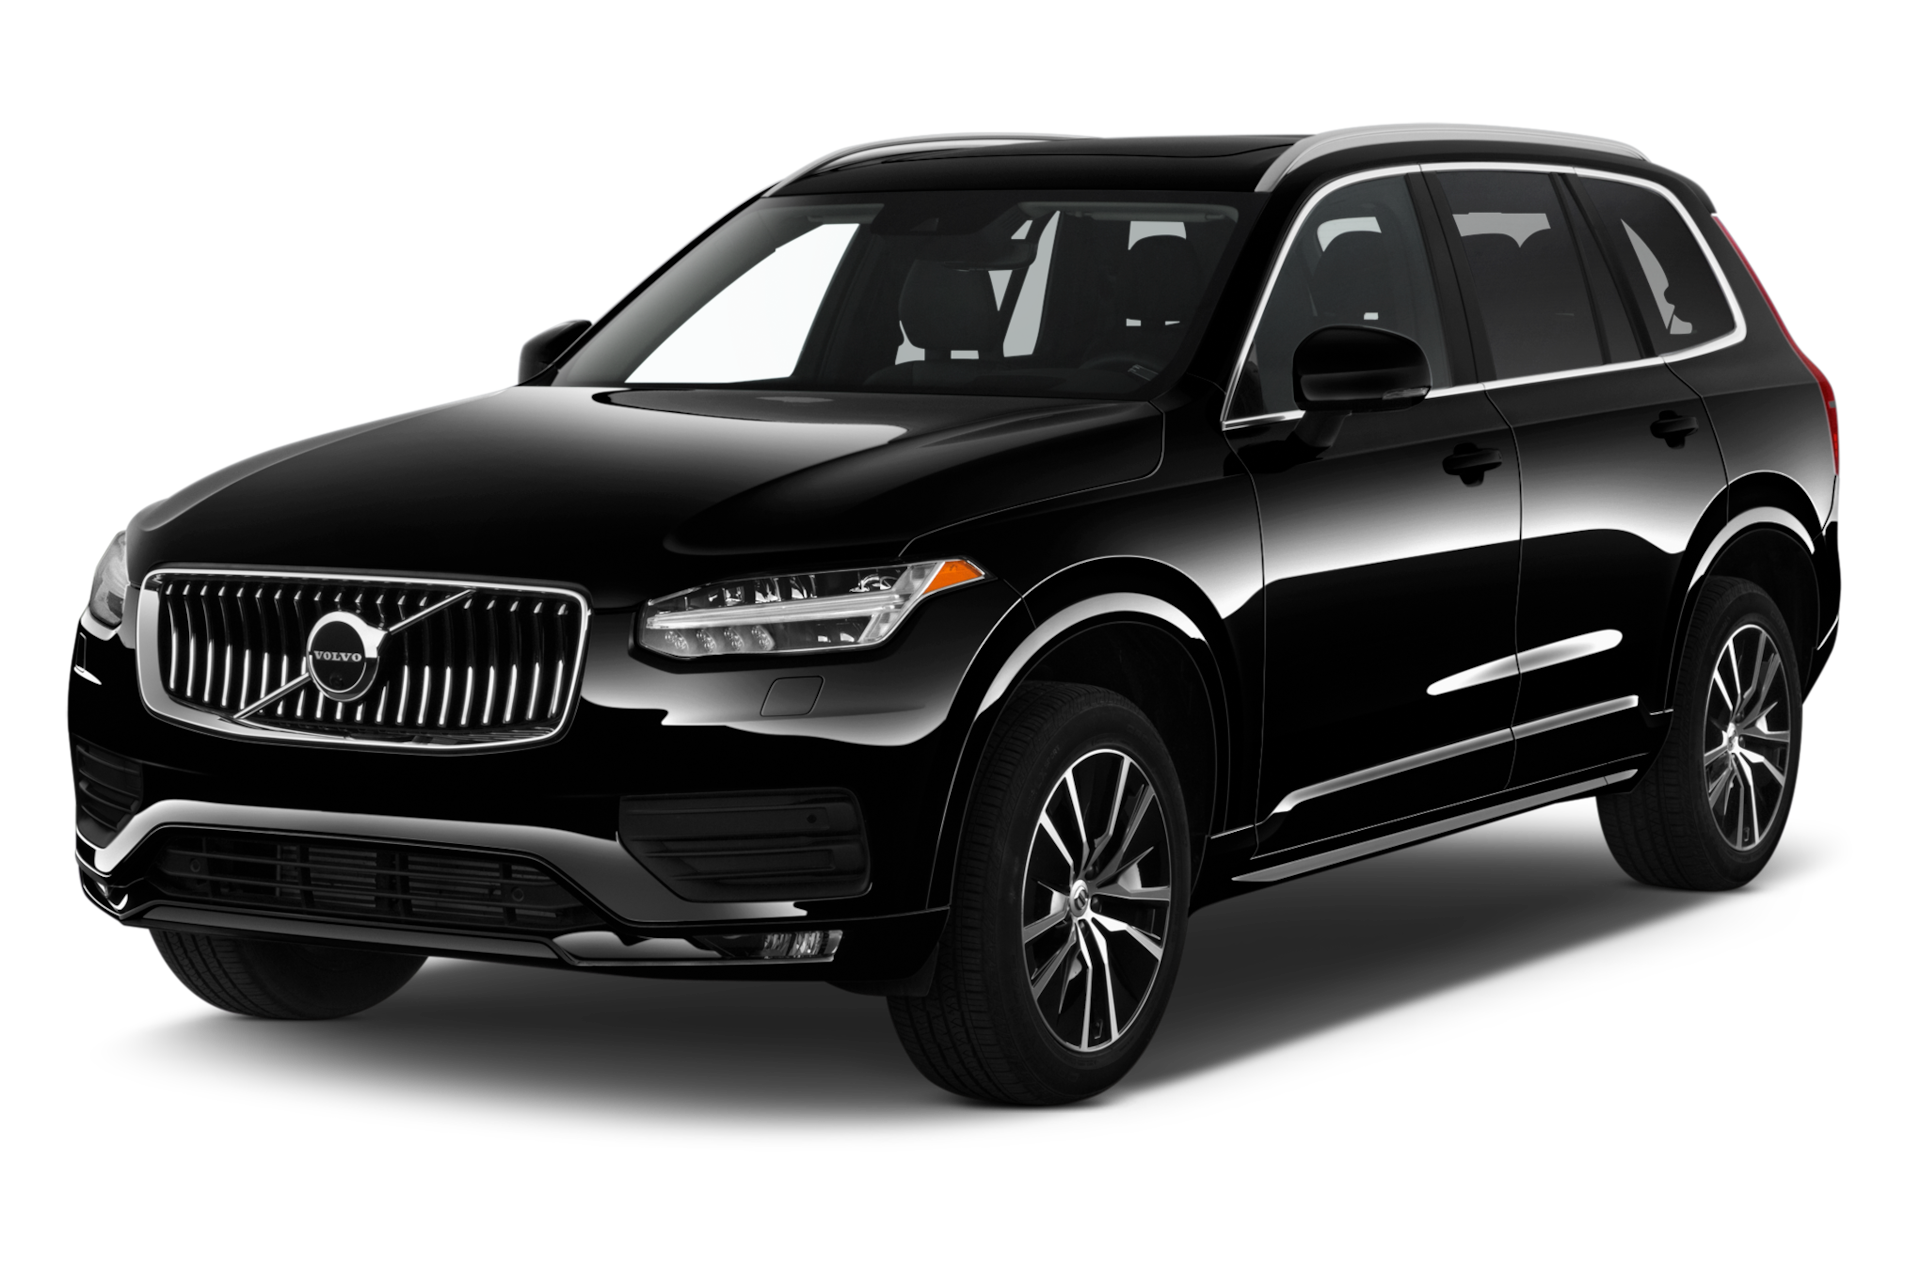 2020 Volvo XC90 Prices, Reviews, and Photos - MotorTrend